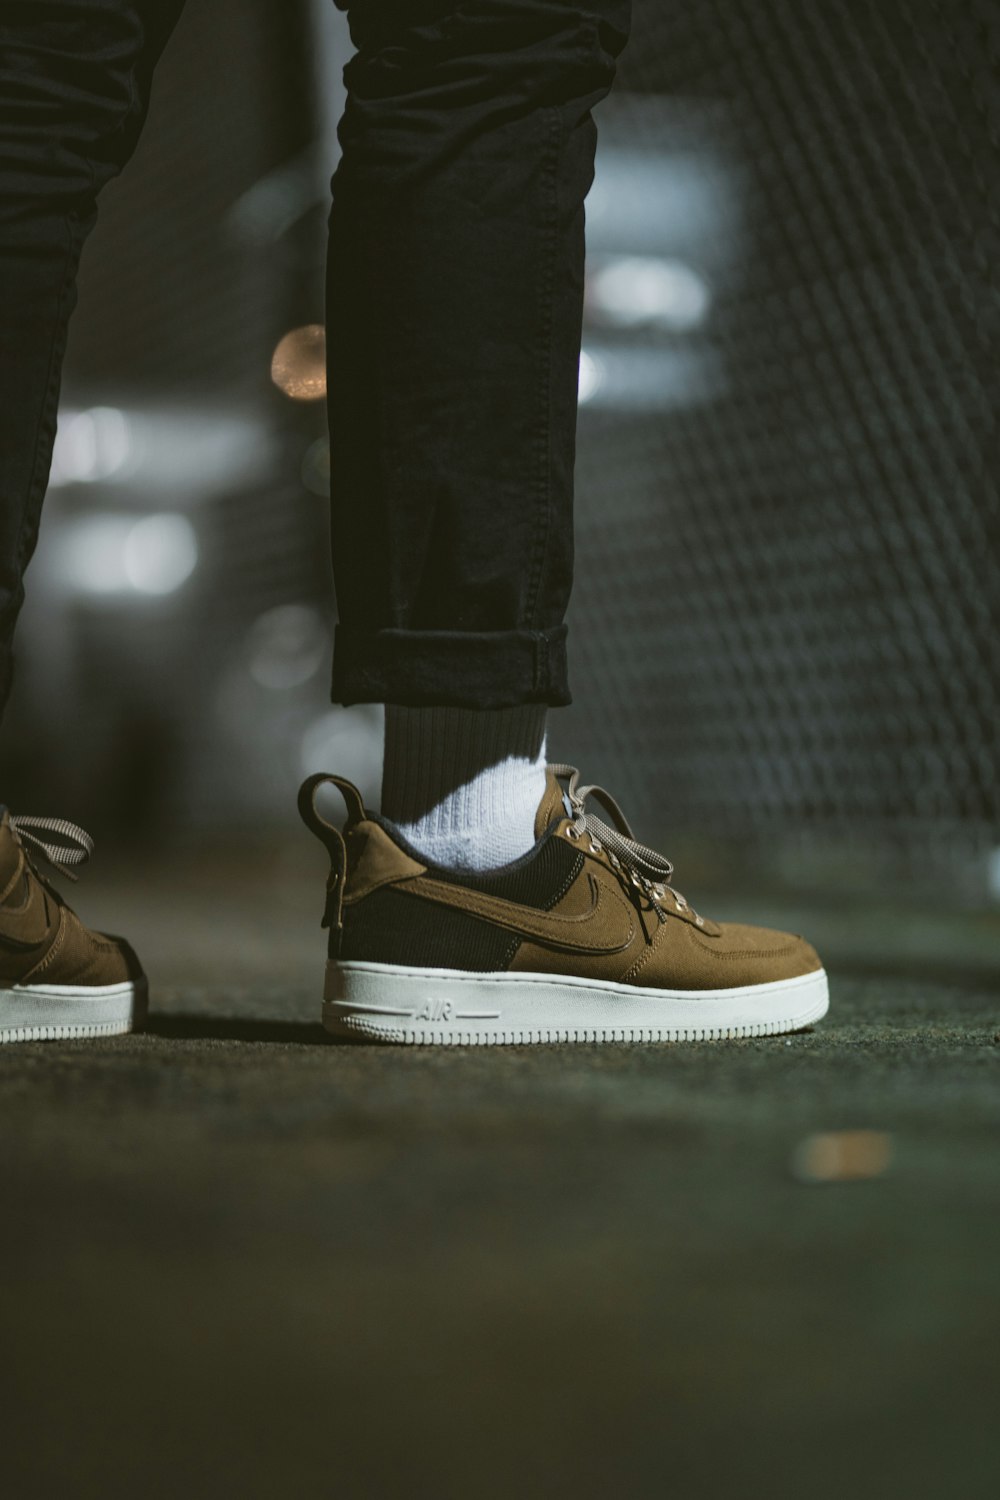 Person standing wearing brown and black Nike Air Force 1 photo – Free Grey  Image on Unsplash